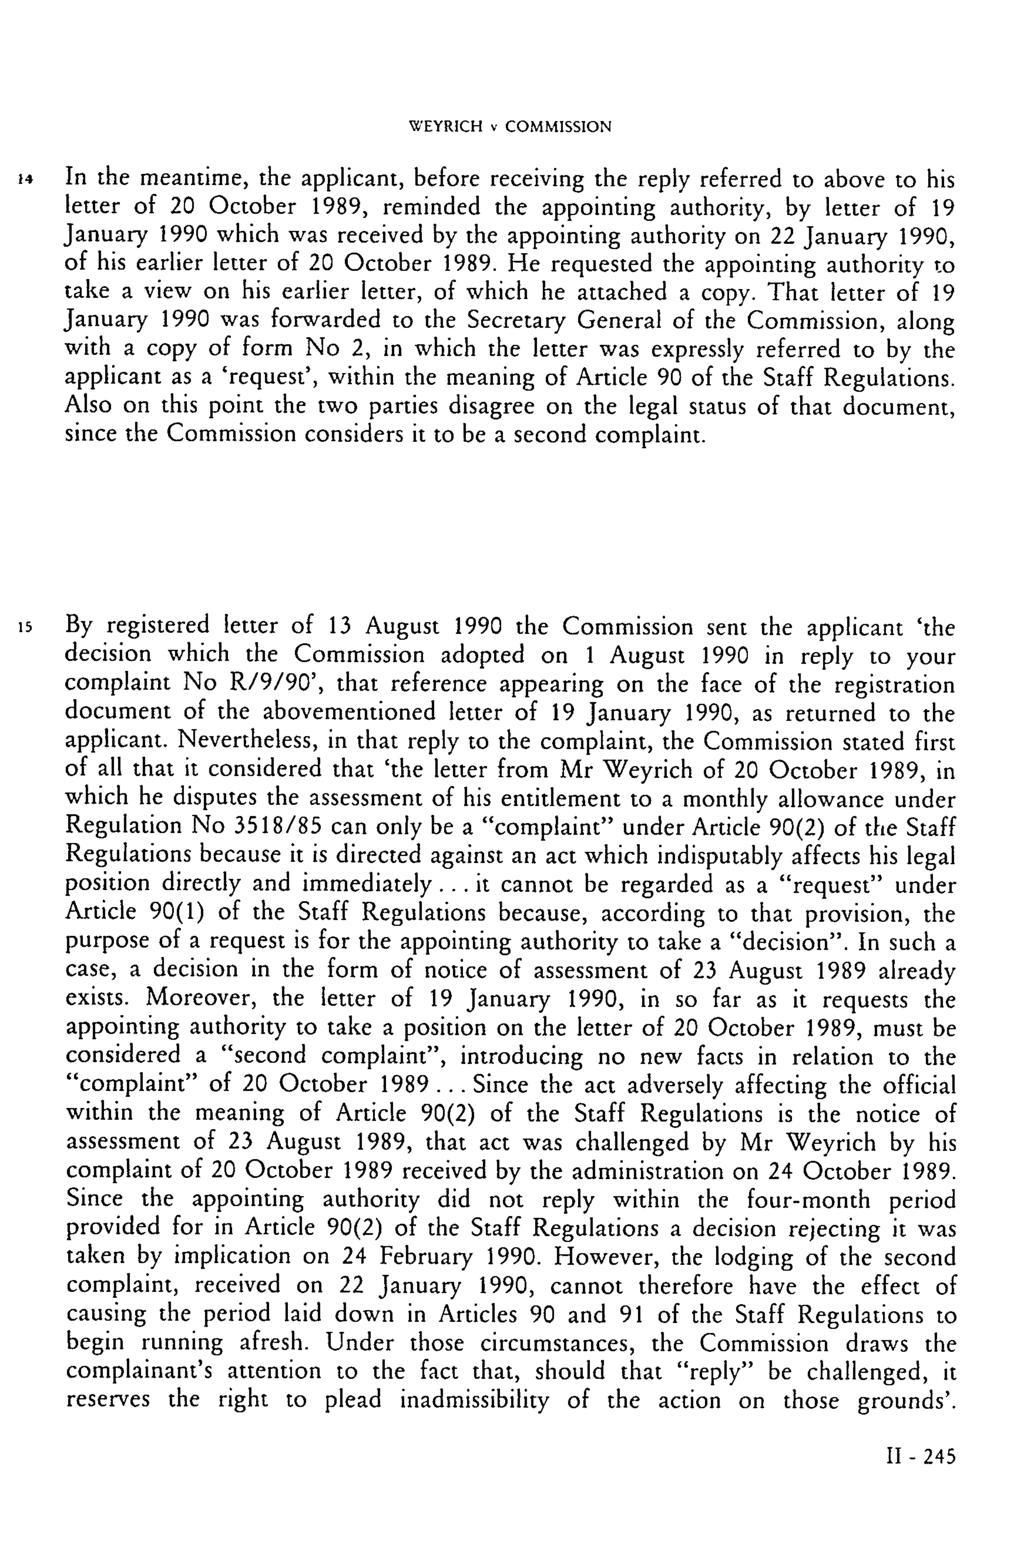 WEYRICH v COMMISSION 14 In the meantime, the applicant, before receiving the reply referred to above to his letter of 20 October 1989, reminded the appointing authority, by letter of 19 January 1990